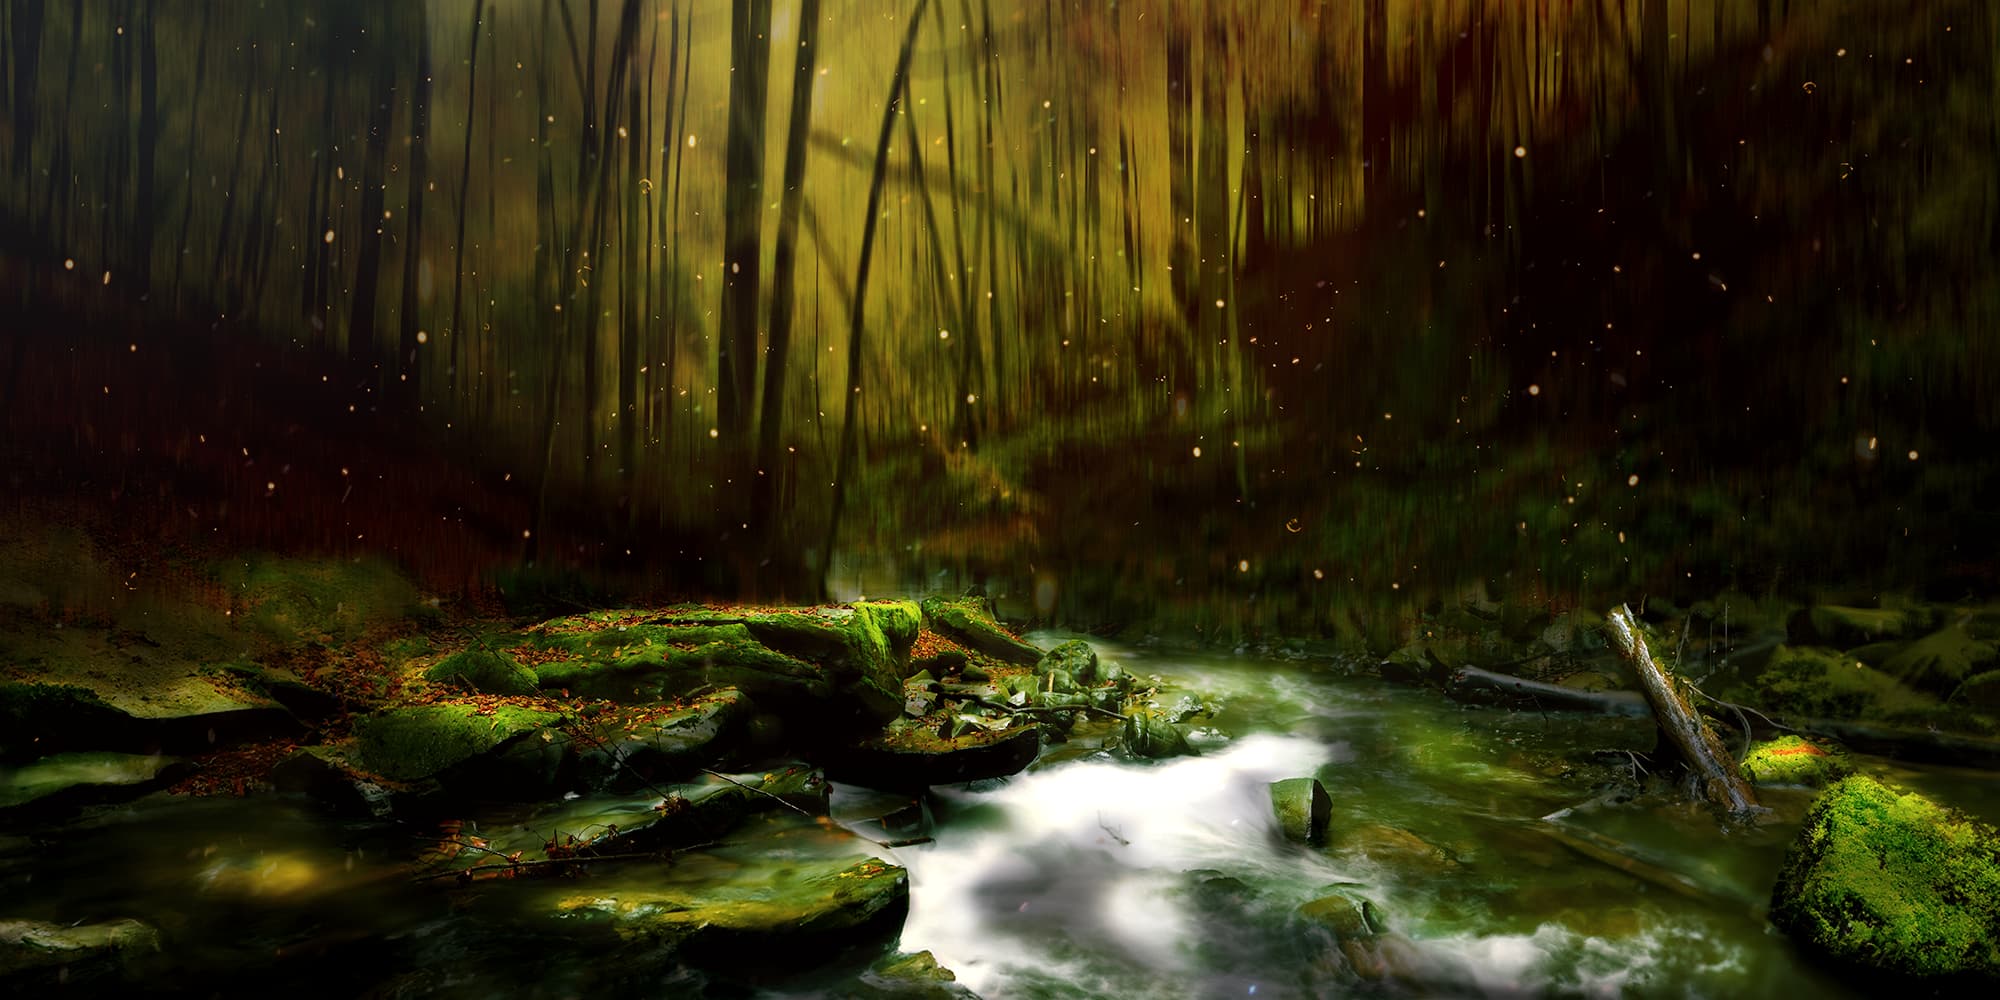 A serene forest stream painting, showcasing the beauty of nature's tranquility. Magic flickers in the twilight glow